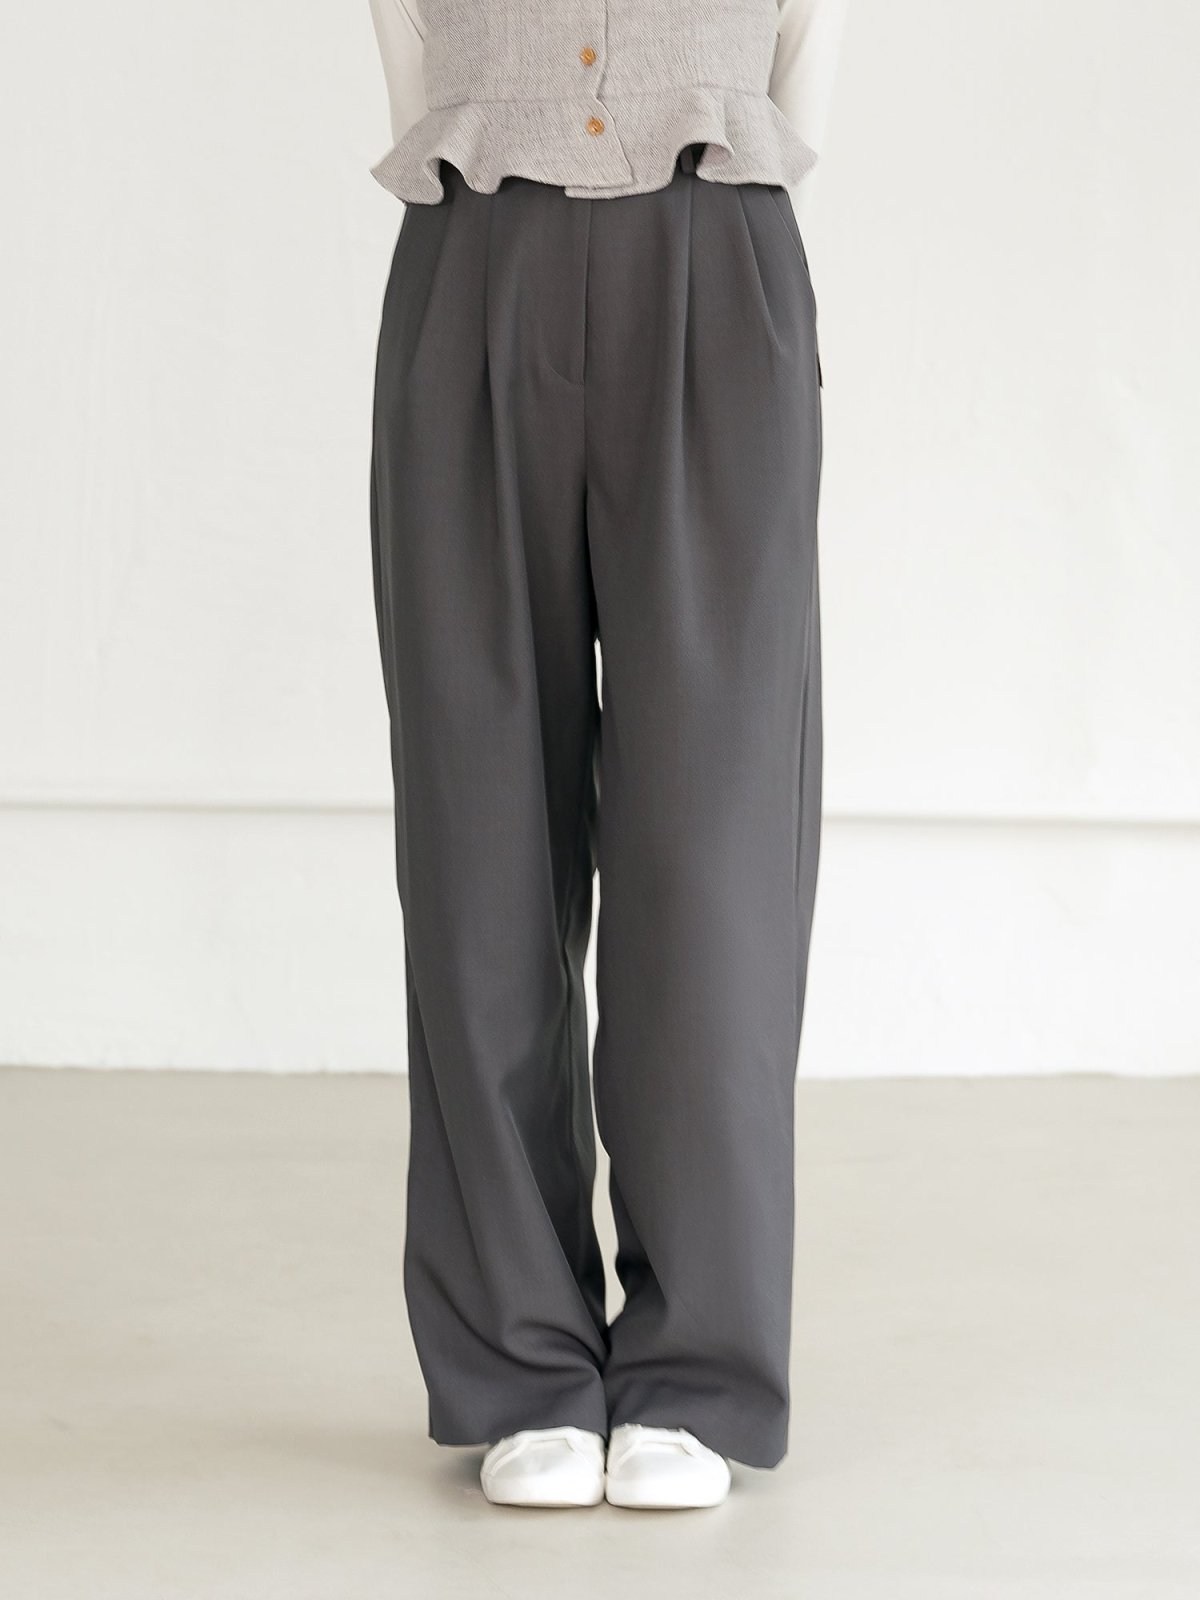 Whitney Wide Leg Pants - DAG-DD8516-23CharcoalS - Charcoal - S - D'zage Designs